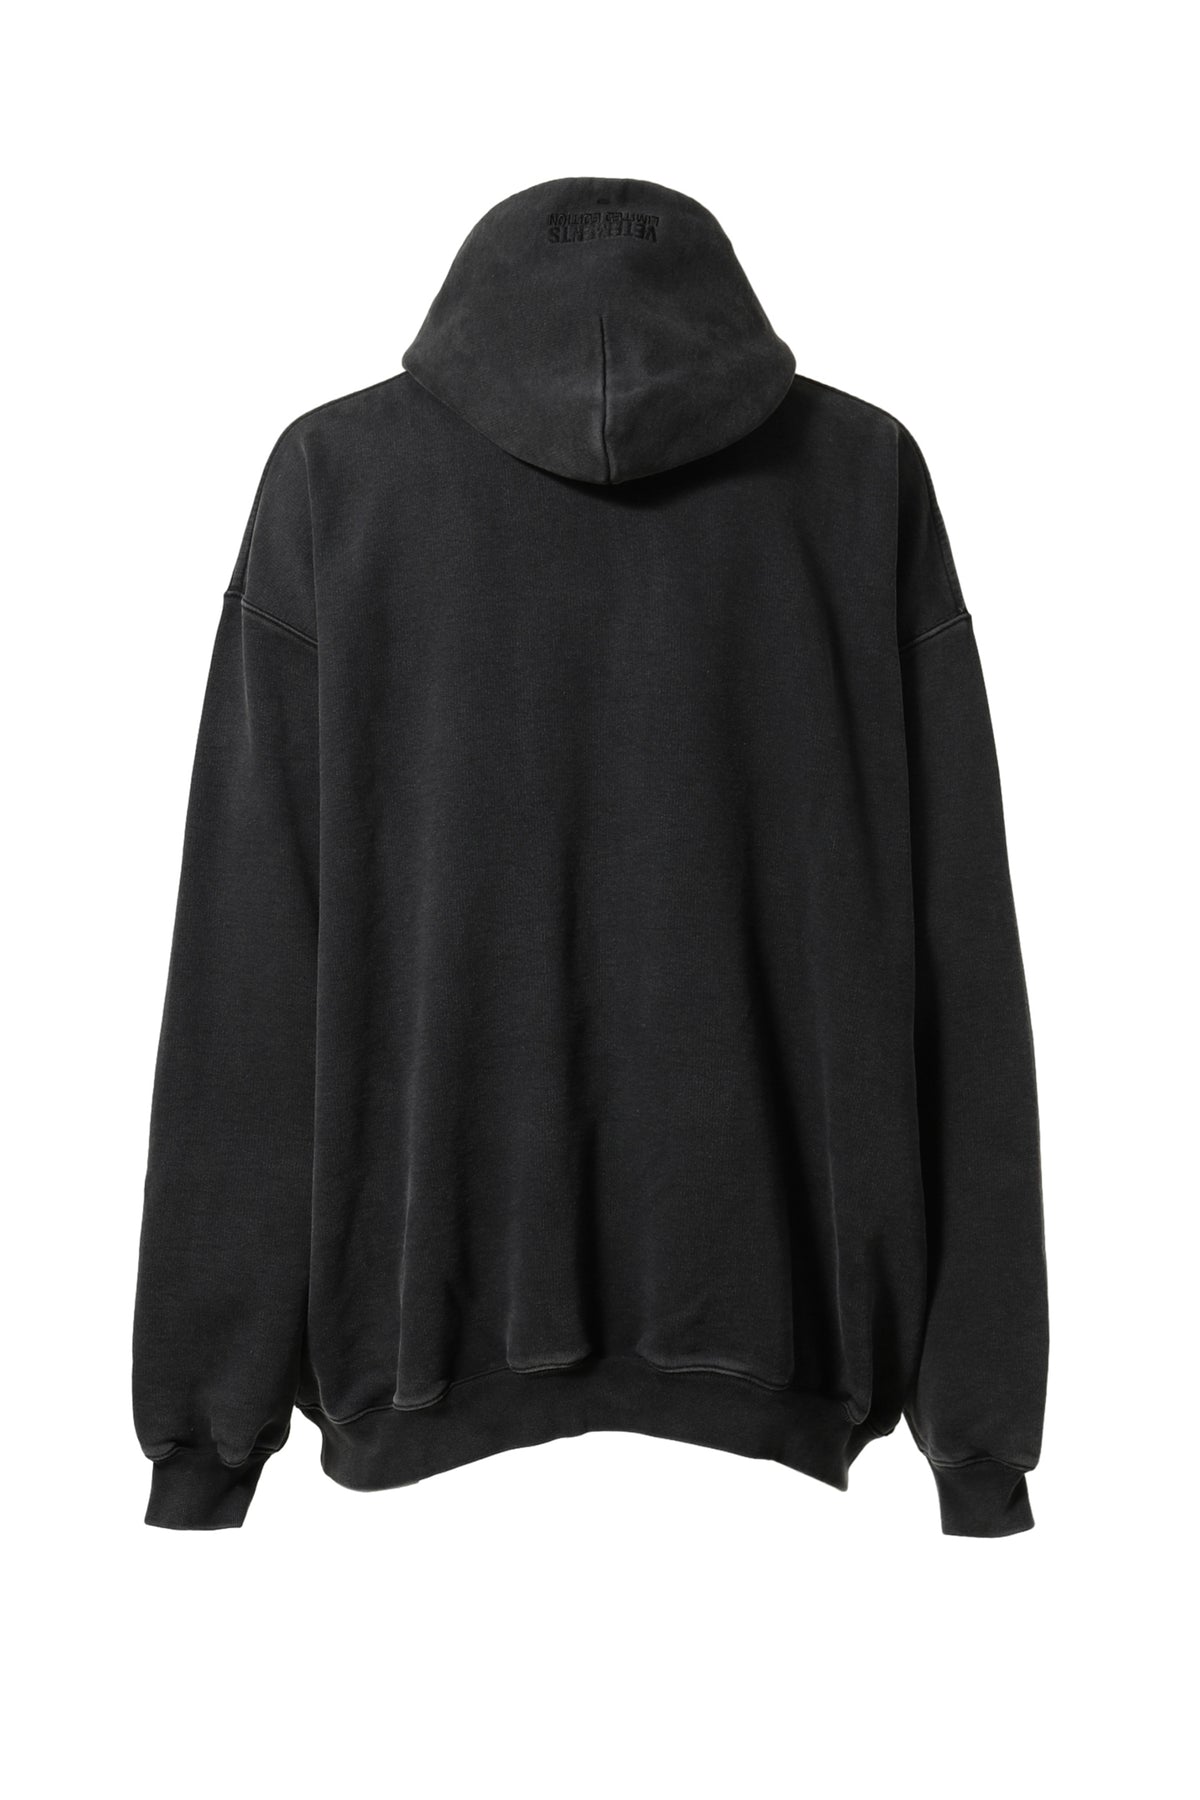 LIMITED EDITION CRYSTAL LOGO HOODIE / BLK